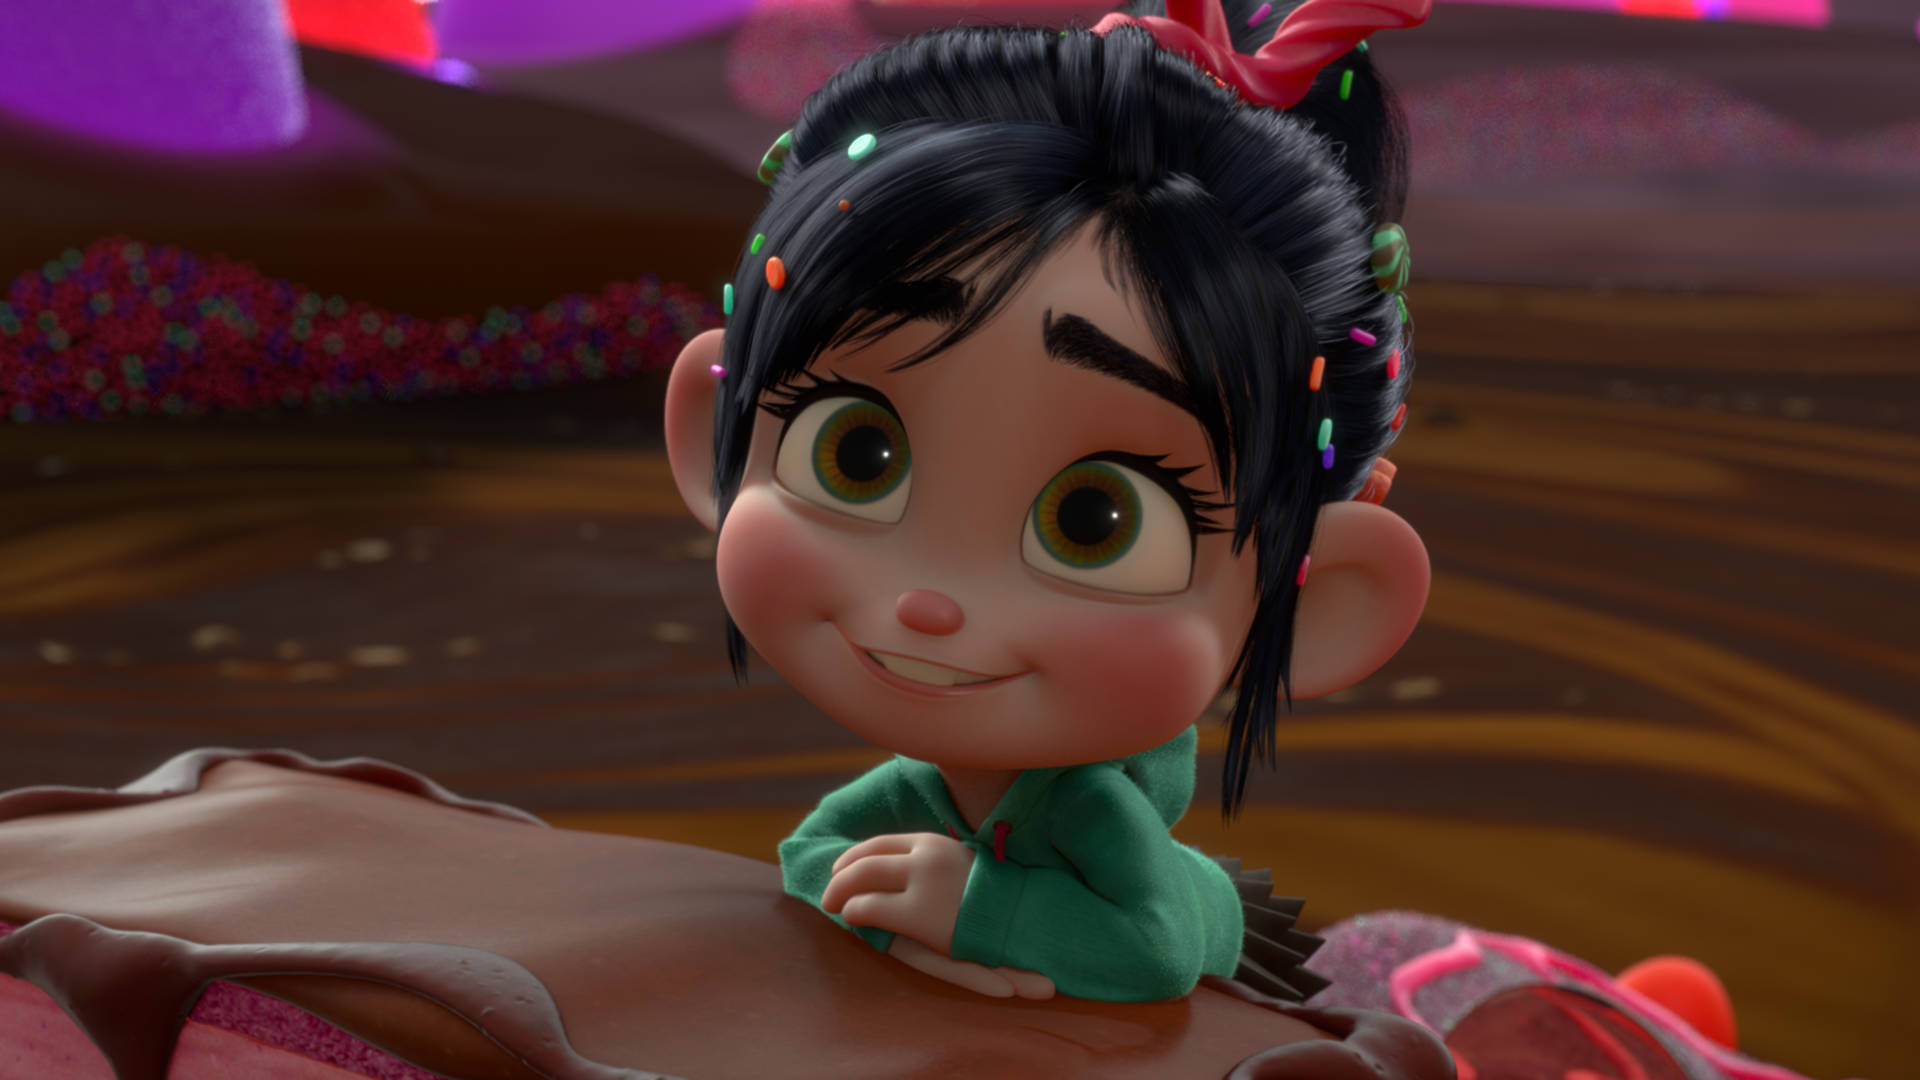 Wreck-it Ralph Charming Vanellope Background